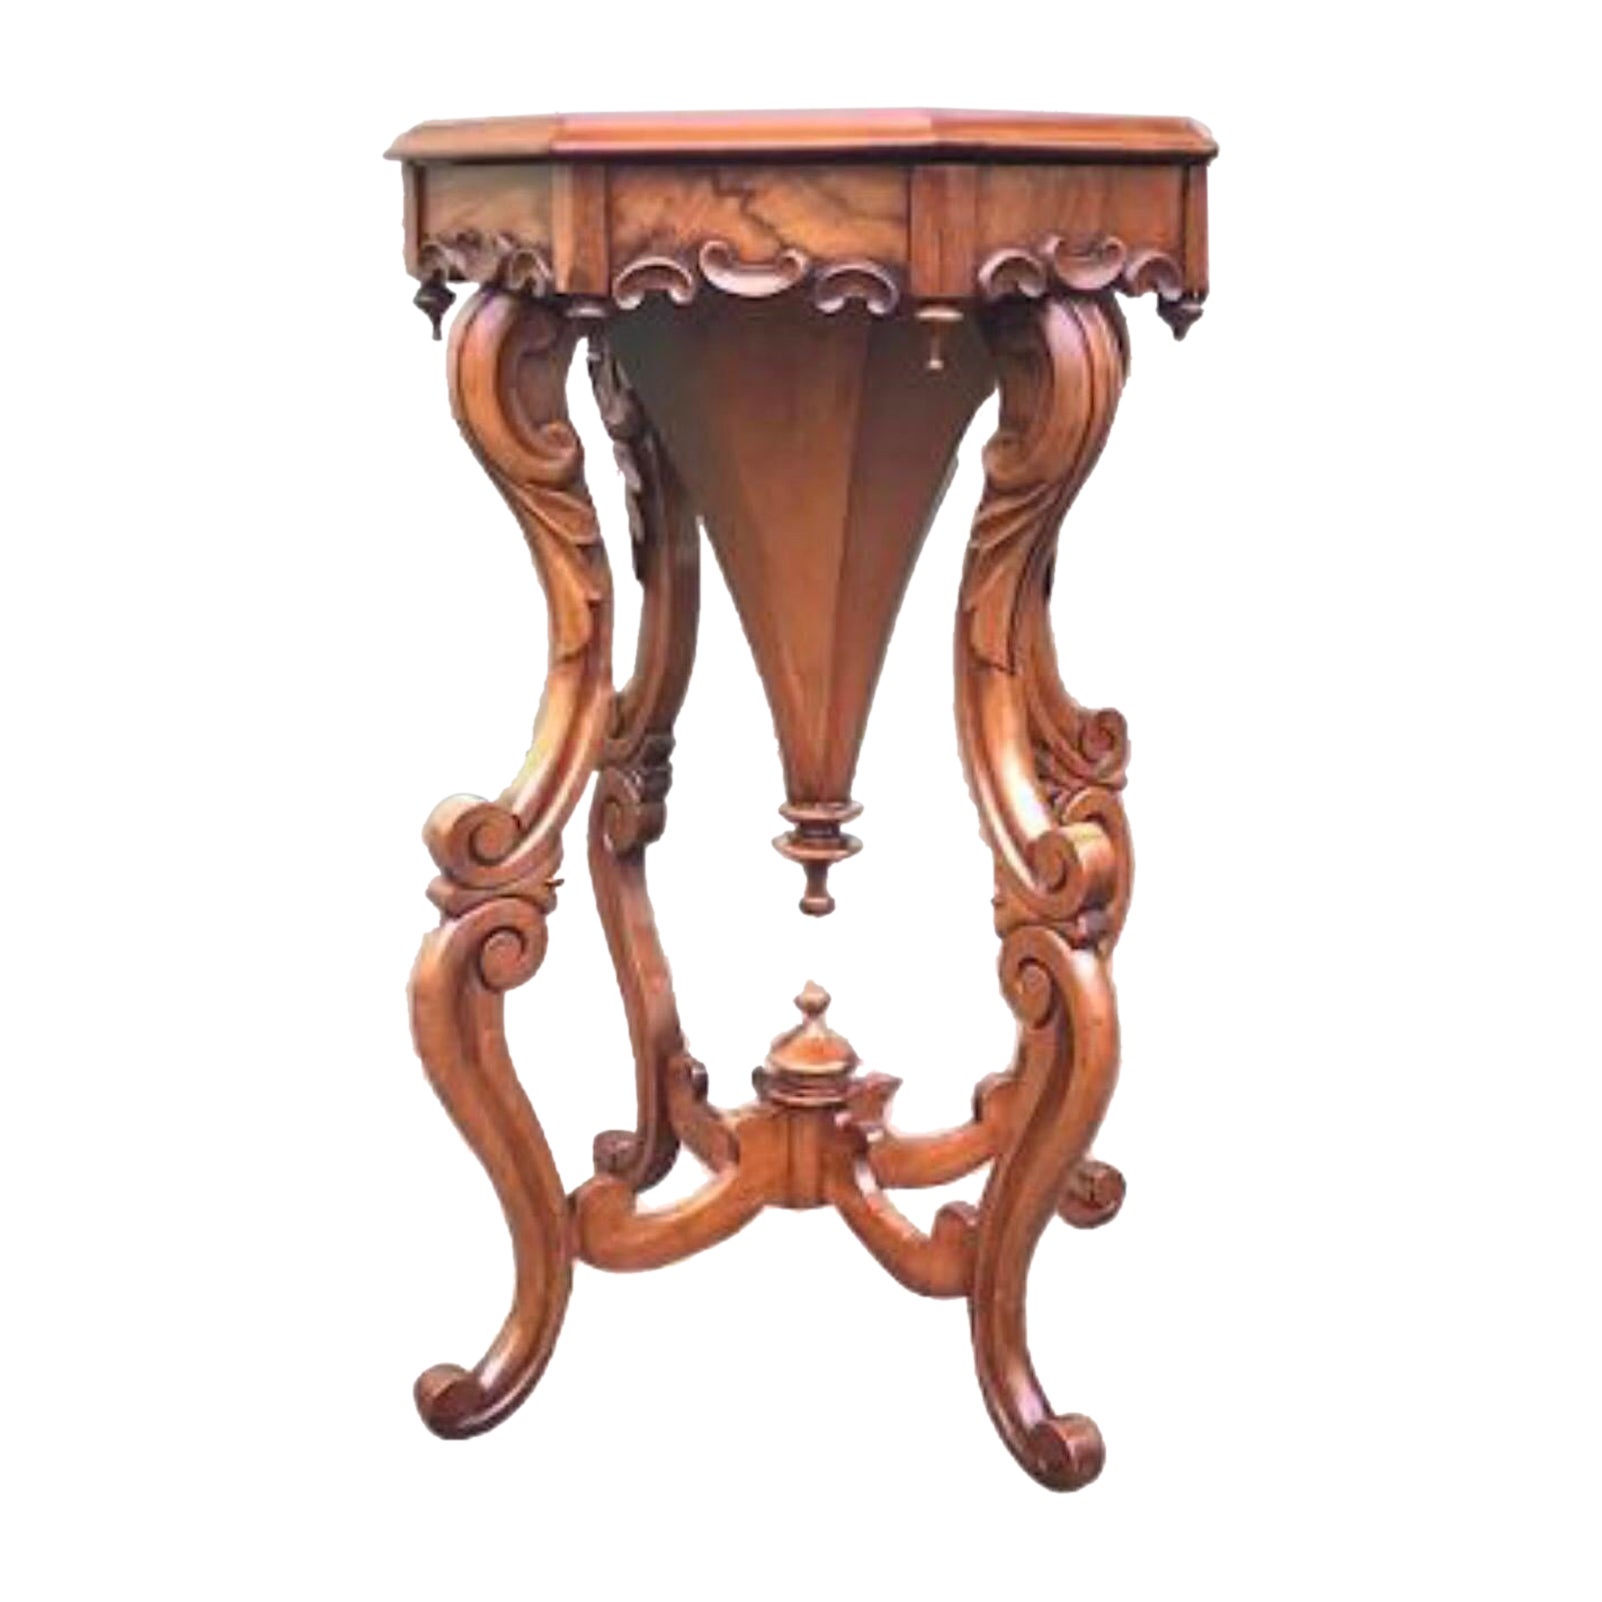 Victorian Burr Walnut Antique Cradled Trumpet Sewing Work Table For Sale